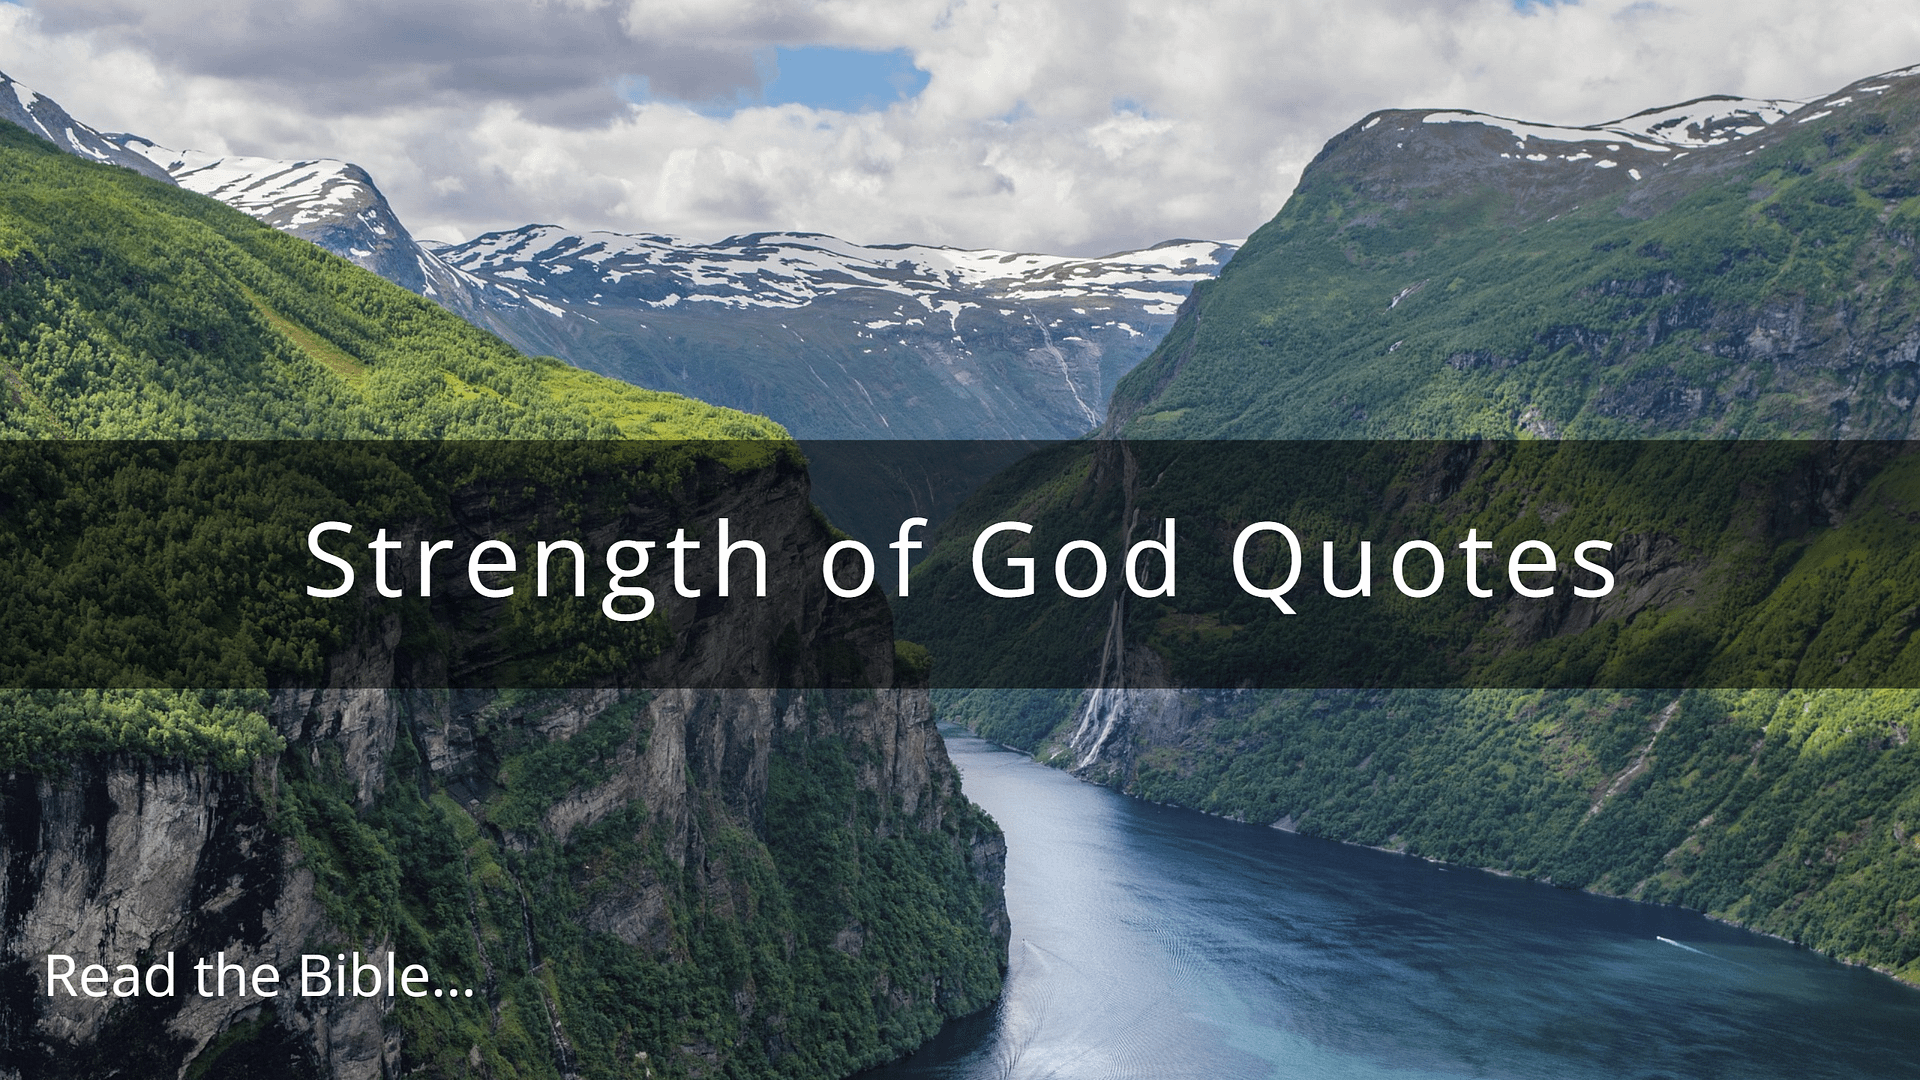 Strength of God Quotes